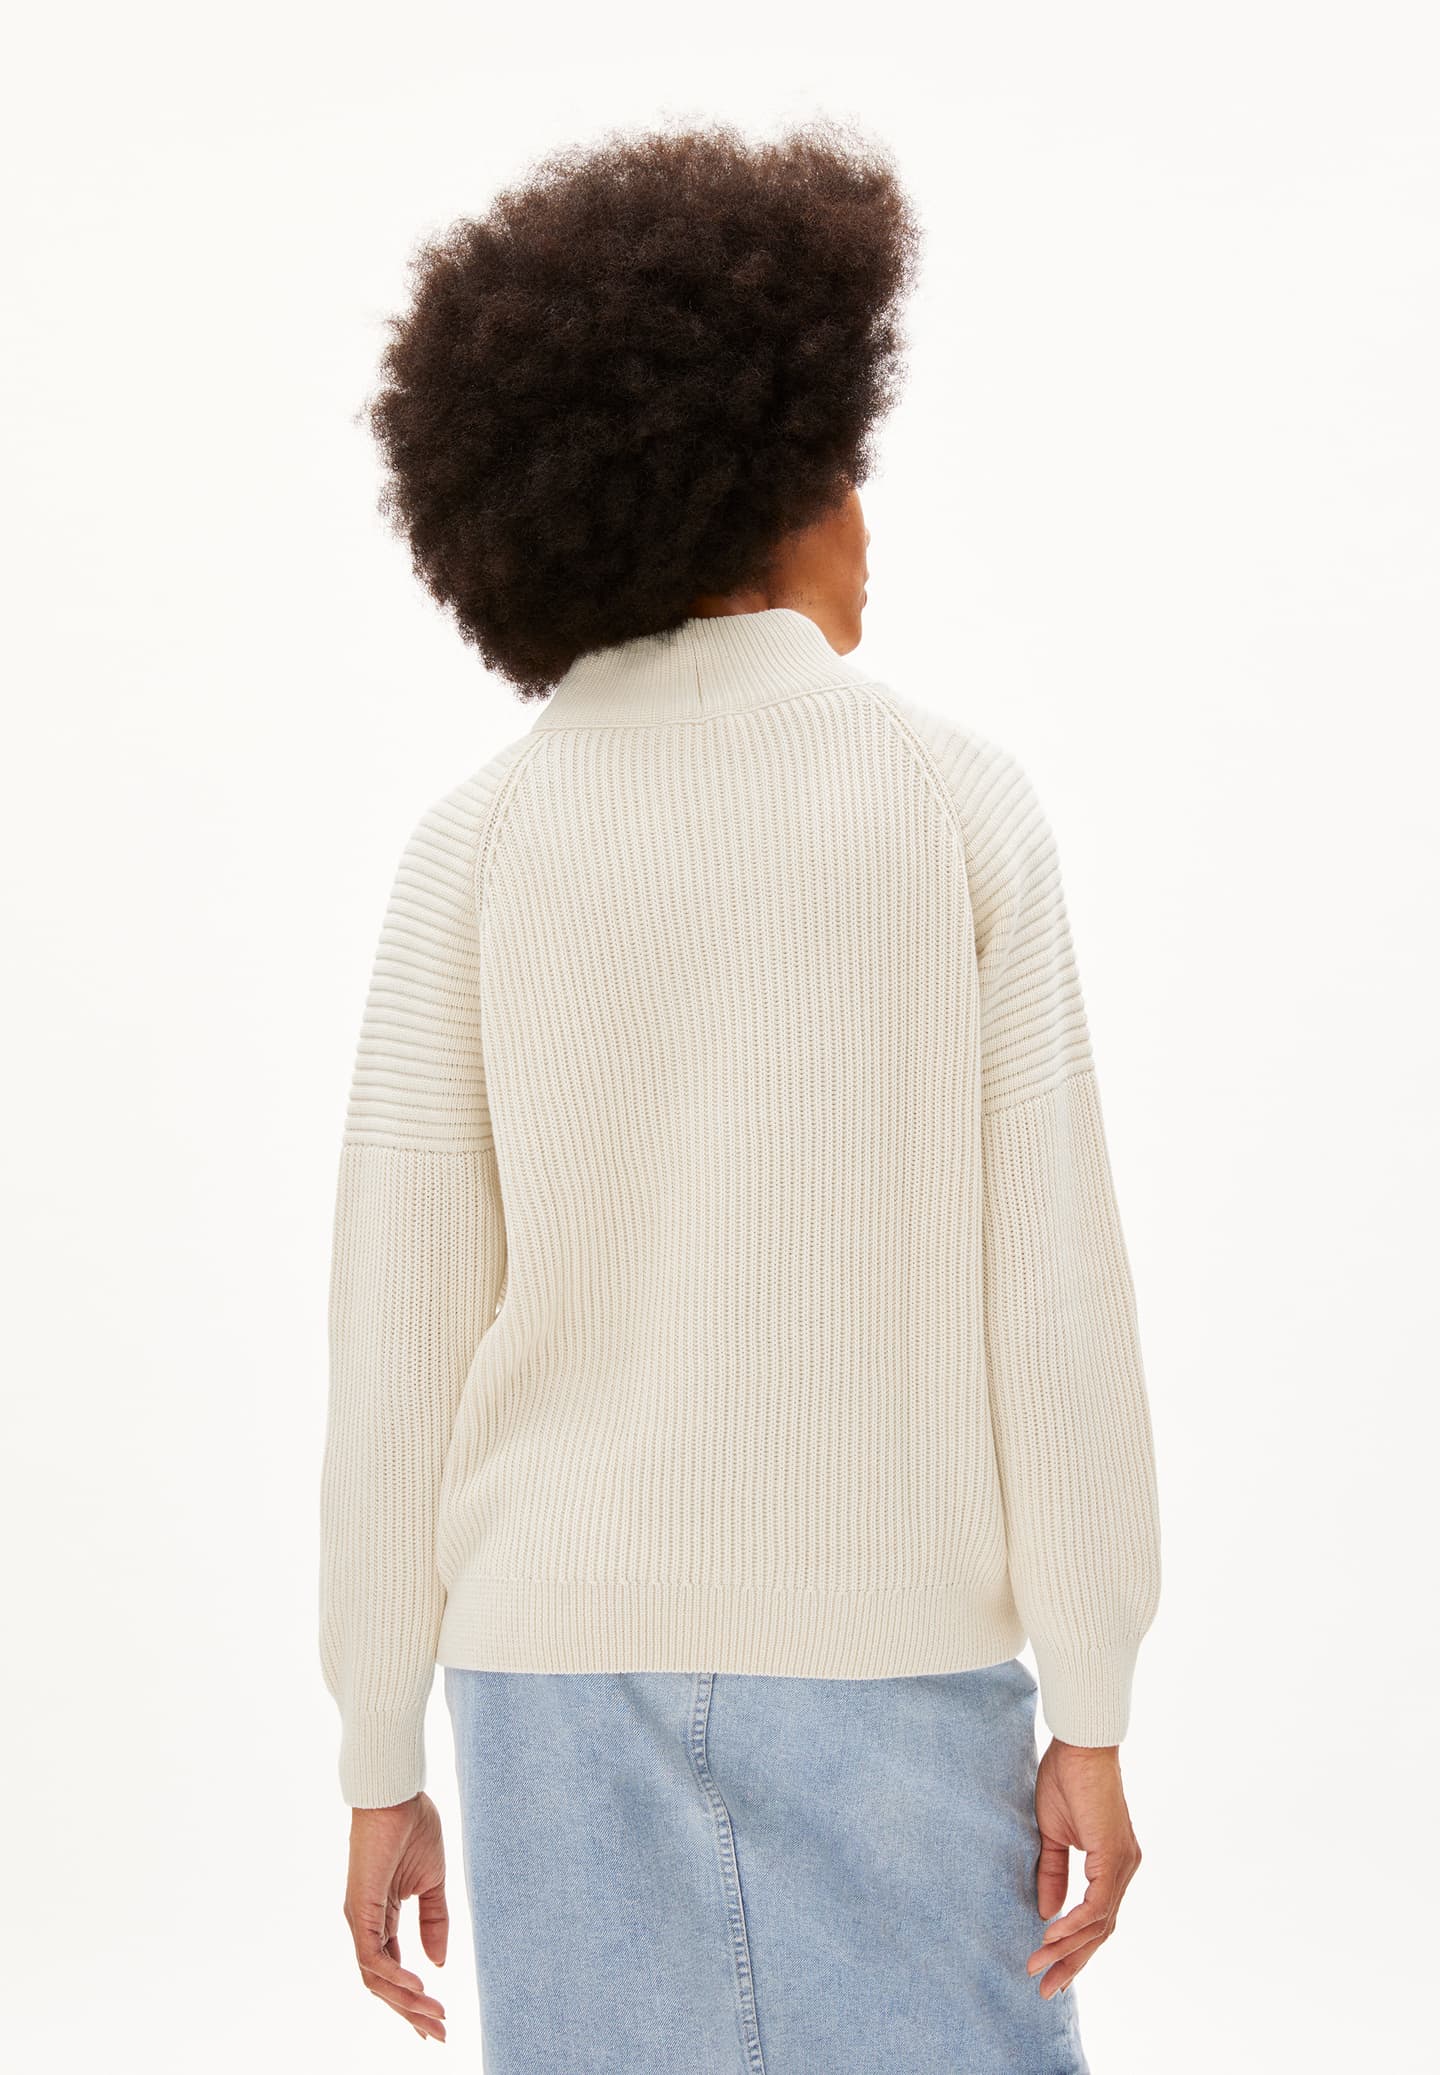 Armedangels - SS24 - Ronyiaas Undyed Organic Cotton Sweater - back 2